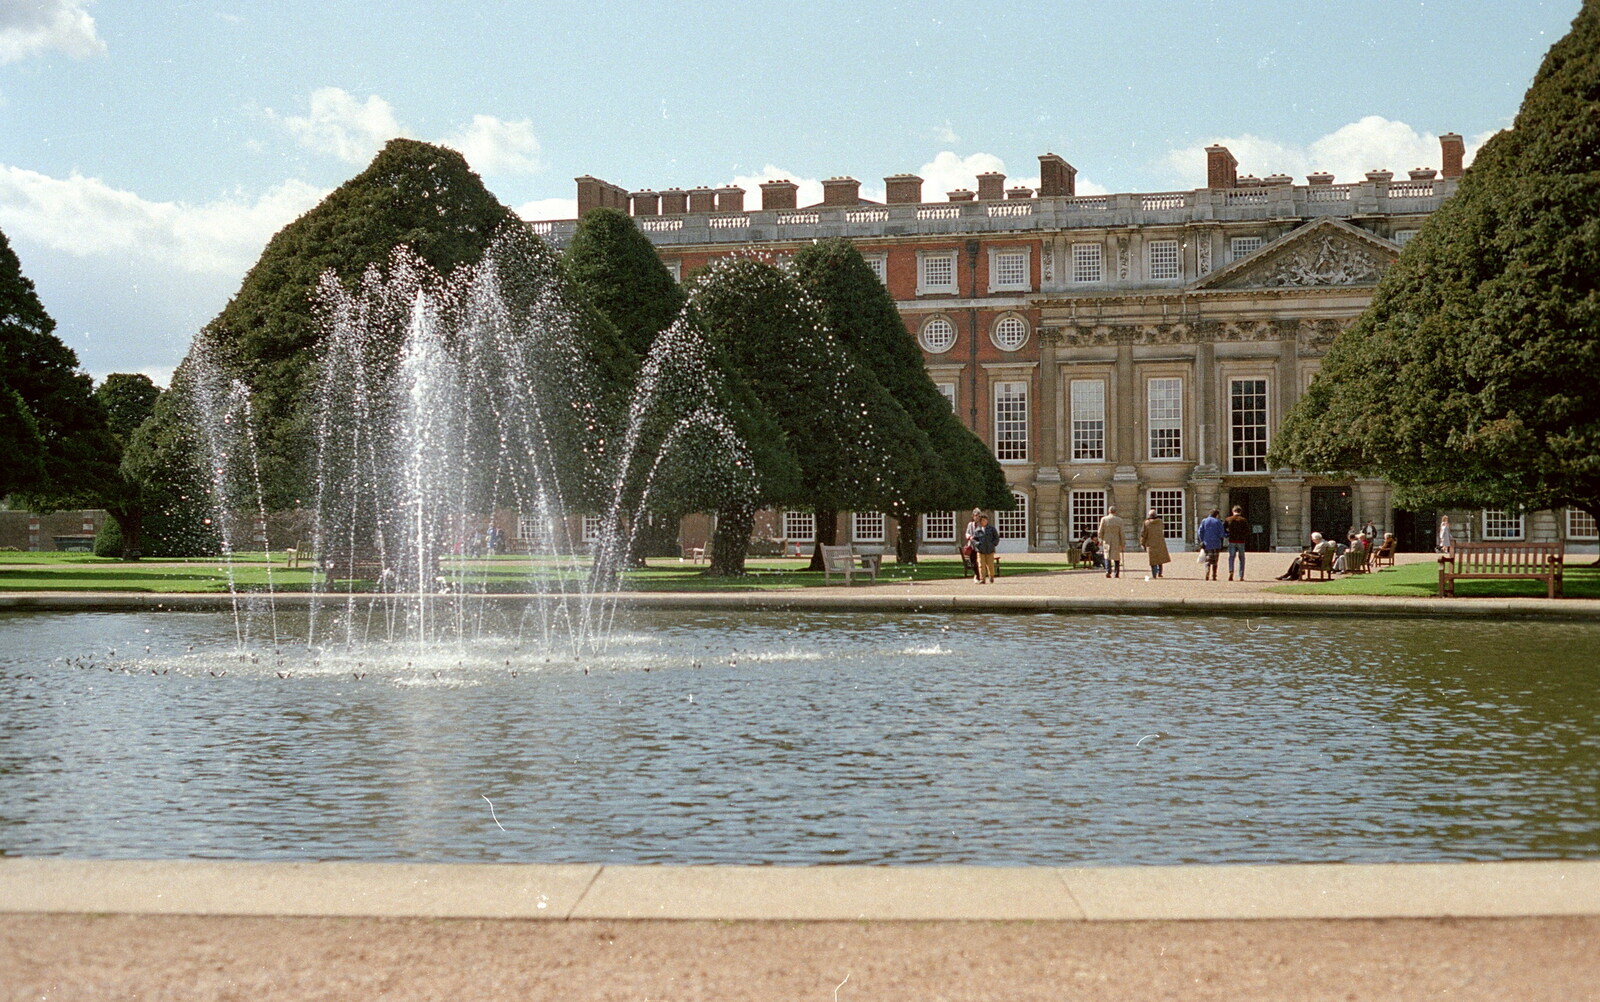 Fountains in Hampton Court's garden from Trotsky's Birthday, New Malden, Kingston Upon Thames - 20th April 1986